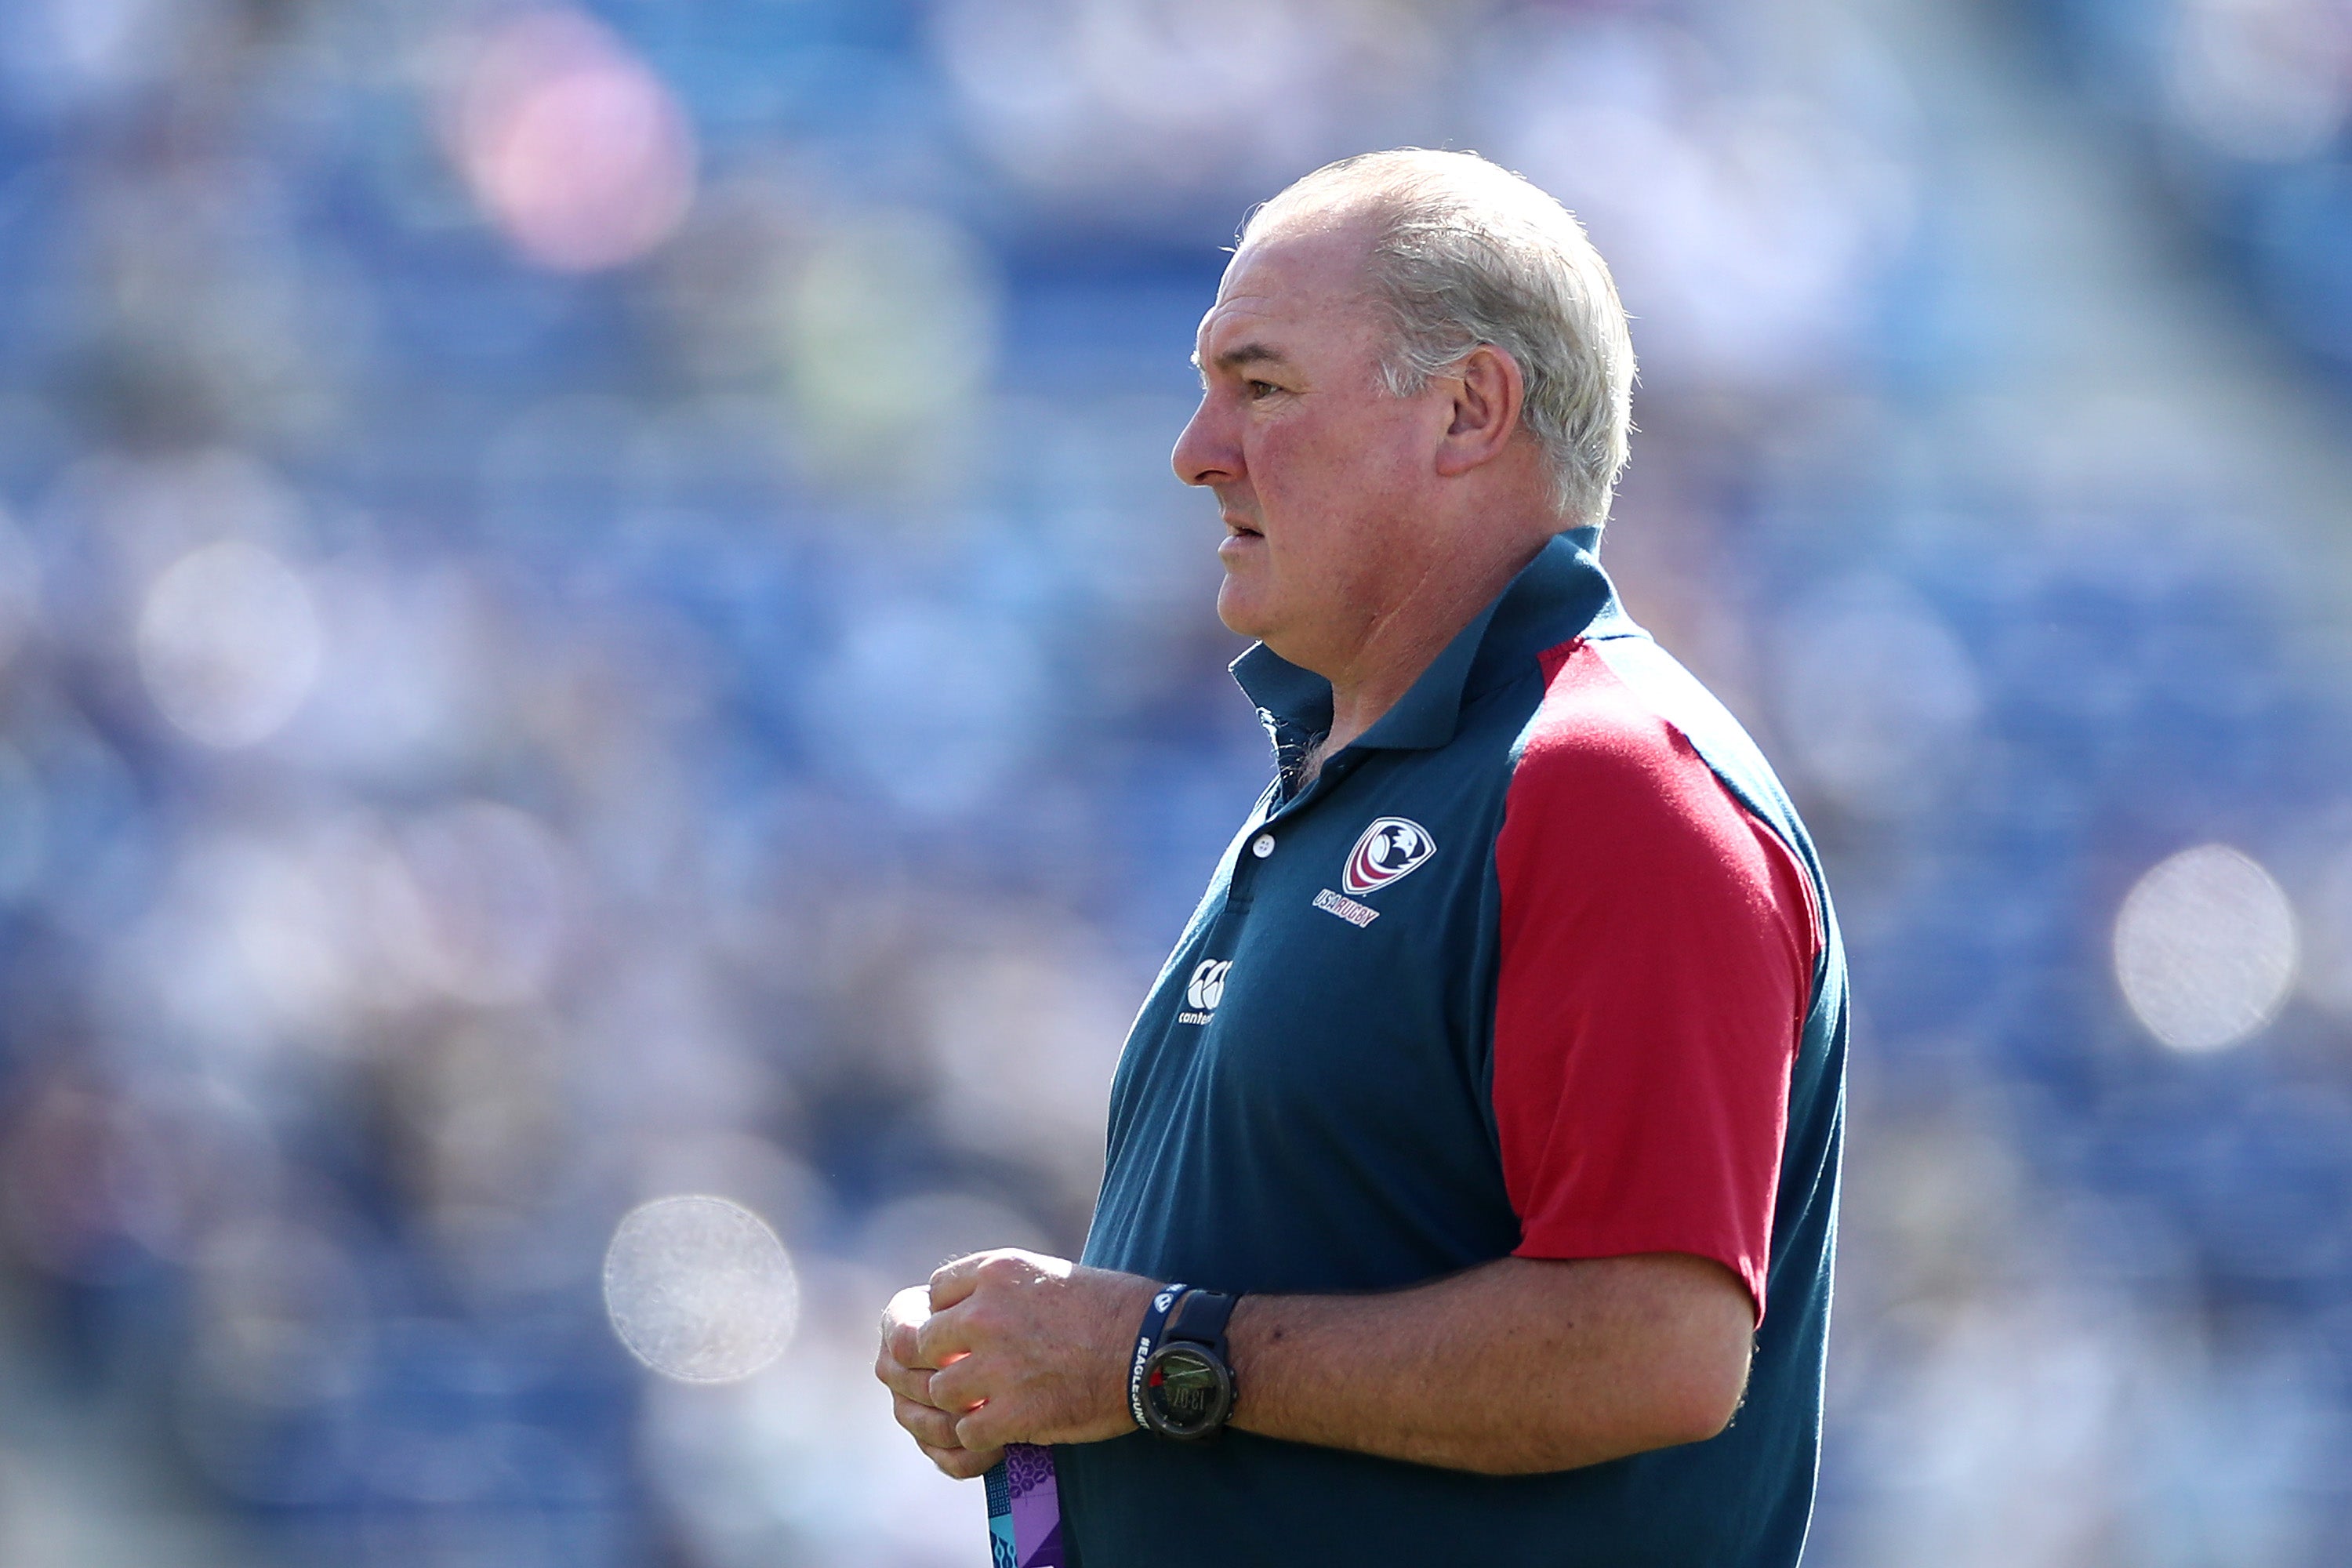 Gary Gold will be hoping his team can cause an upset